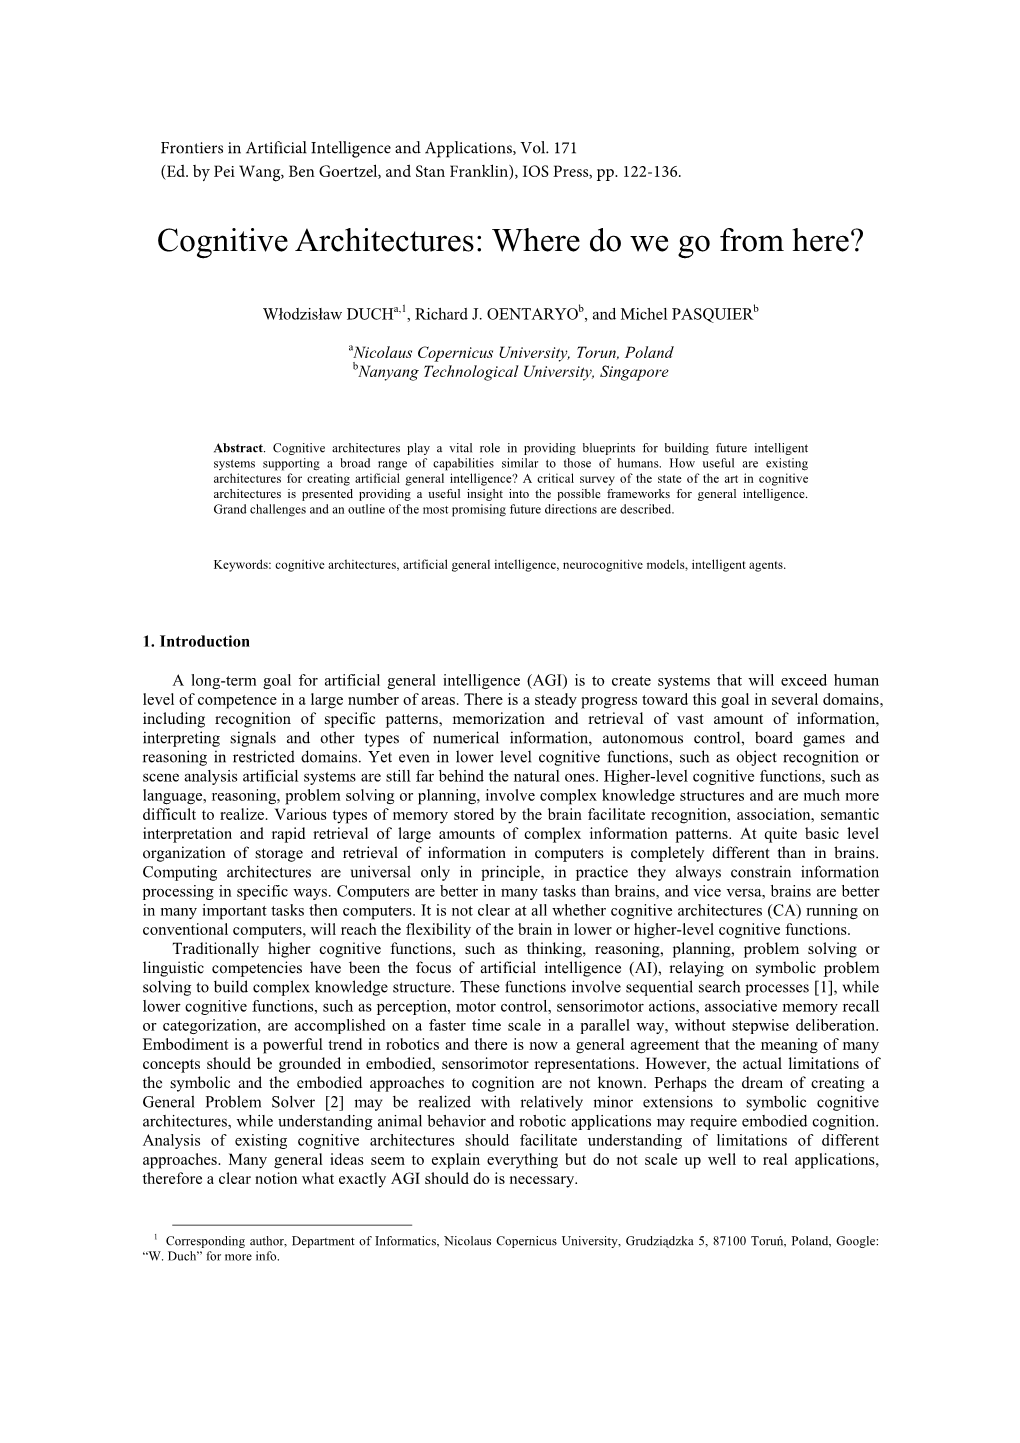 Cognitive Architectures: Where Do We Go from Here?